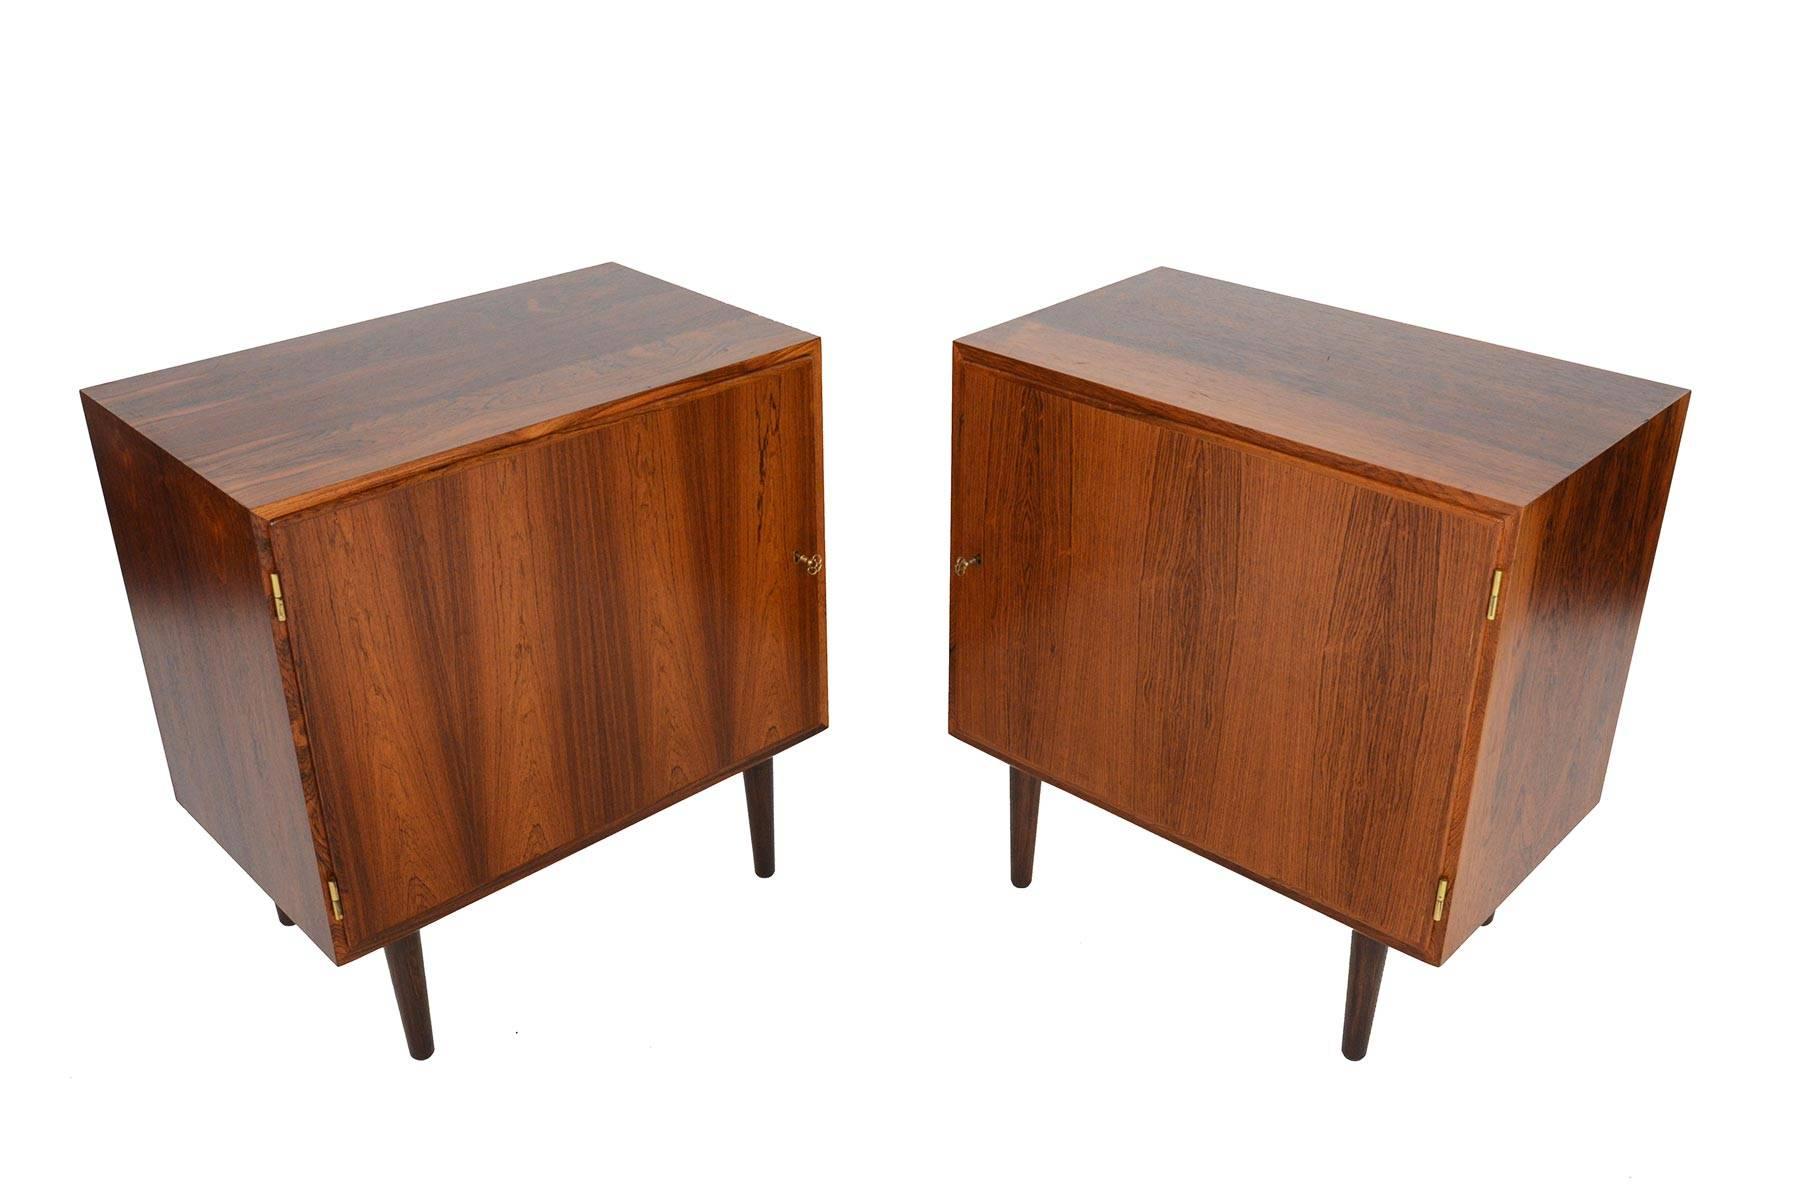 This pair of Danish modern Brazilian rosewood nightstands model HD 40 was designed by Carlo Jensen for Poul Hundevad in the early 1960s. This unique pair are identical but open from opposite sides making them perfect to pair with a bed or sofa. The